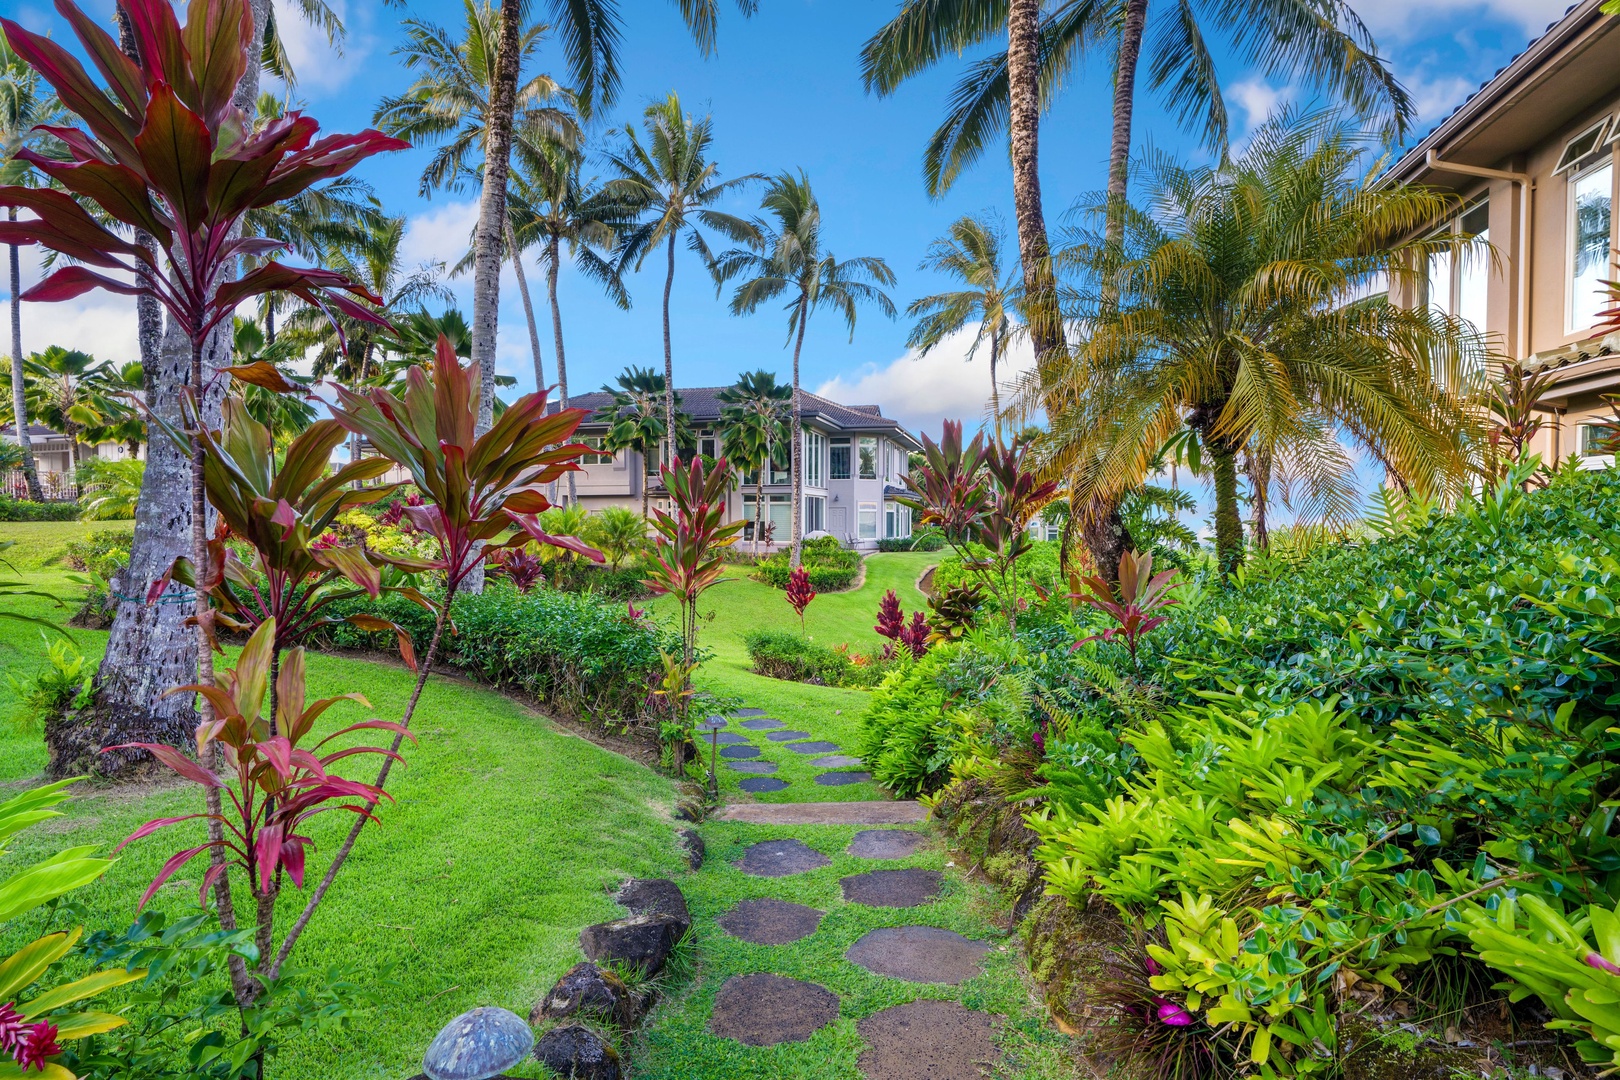 Princeville Vacation Rentals, Tropical Elegance - In the distance, elegant villas stand majestically, their architecture harmonizing with the surrounding nature.